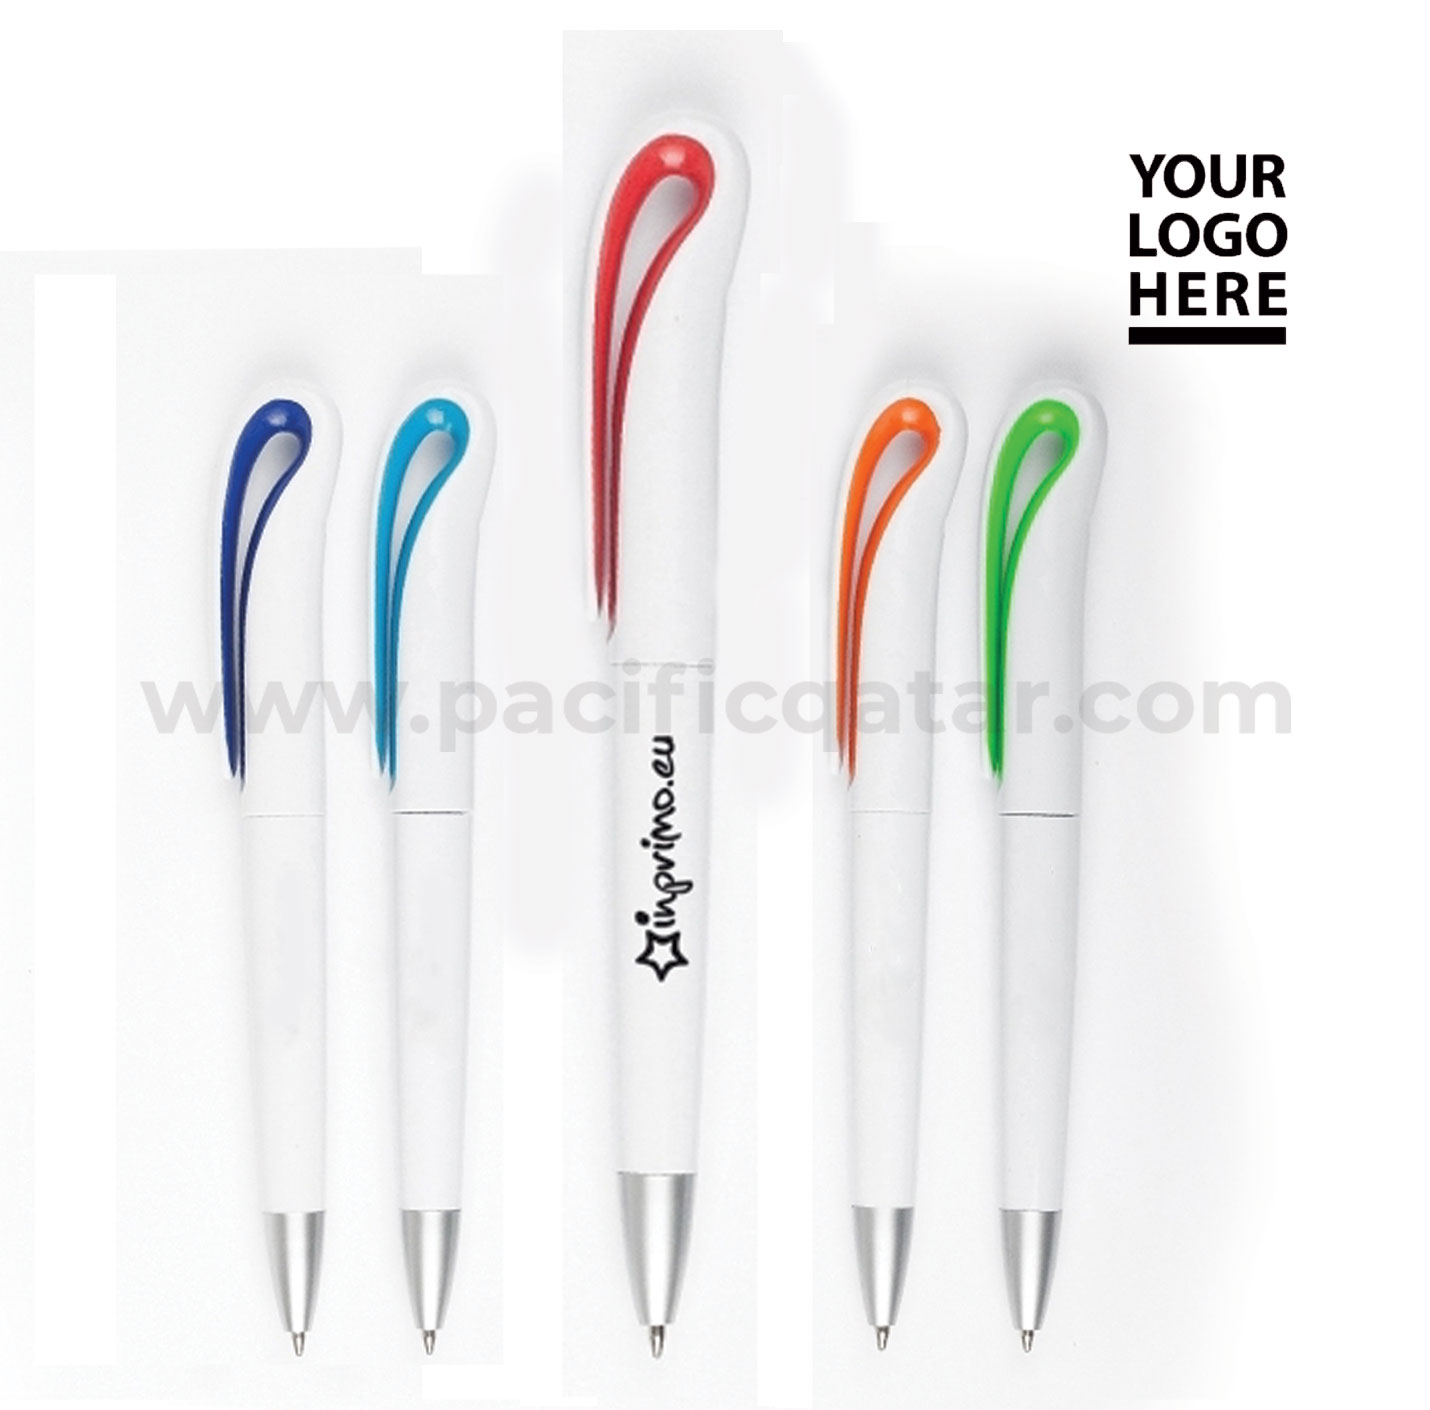 Plastic pen with different color and logo